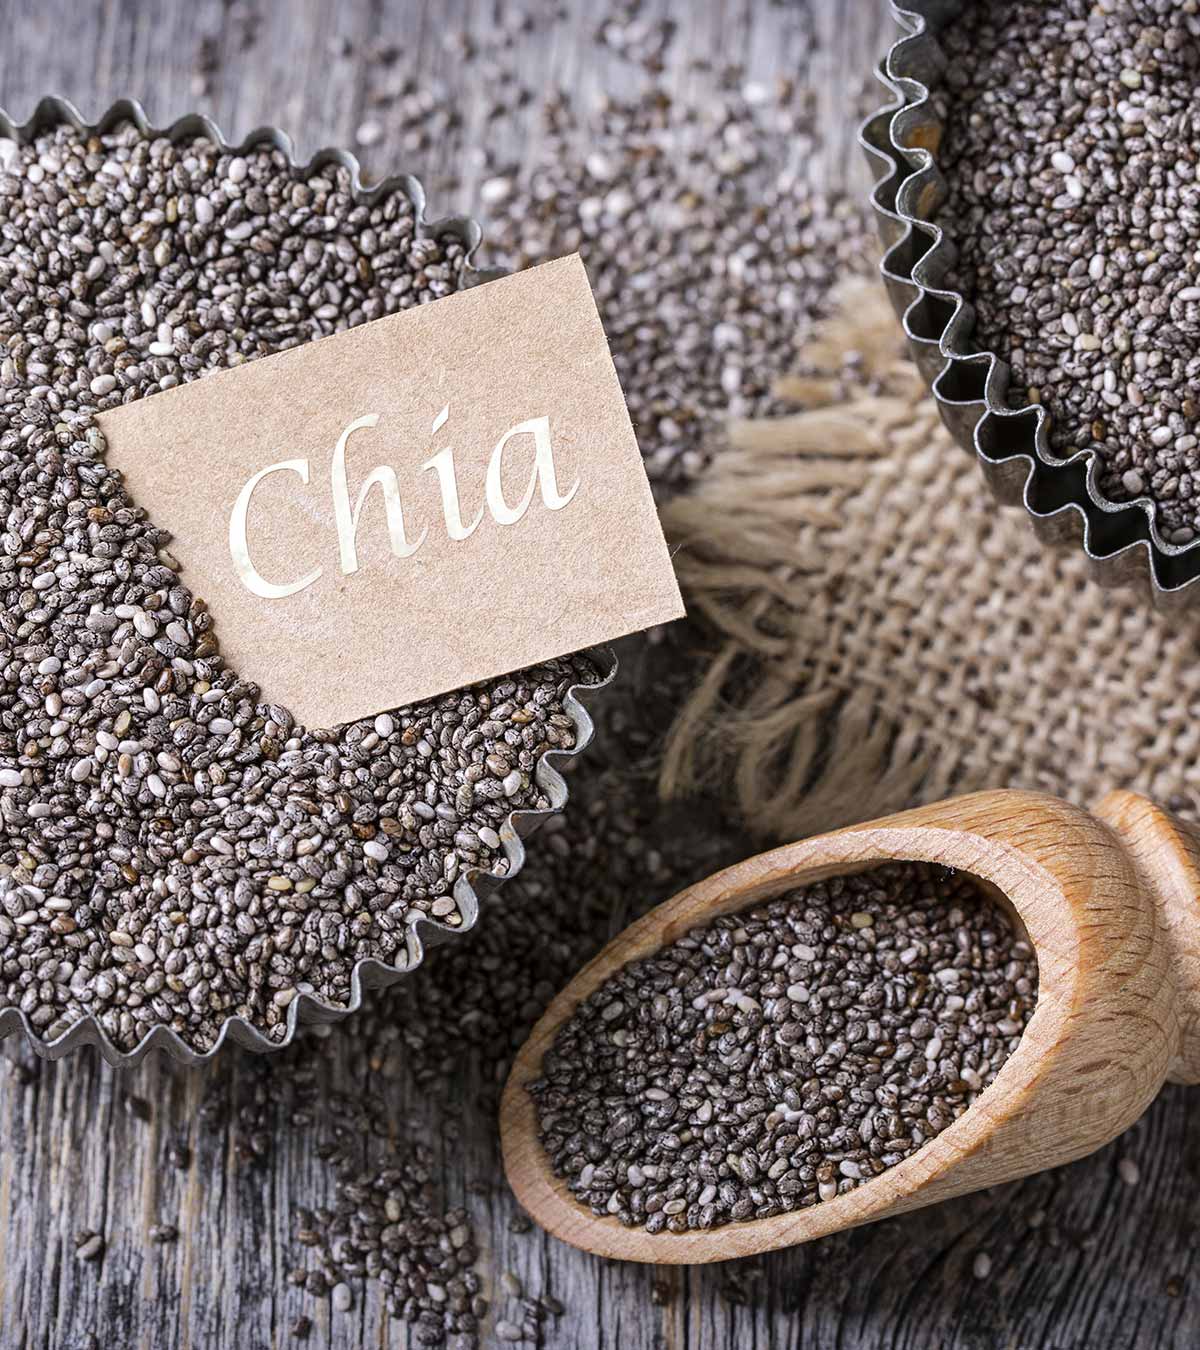 Chia seeds on different container